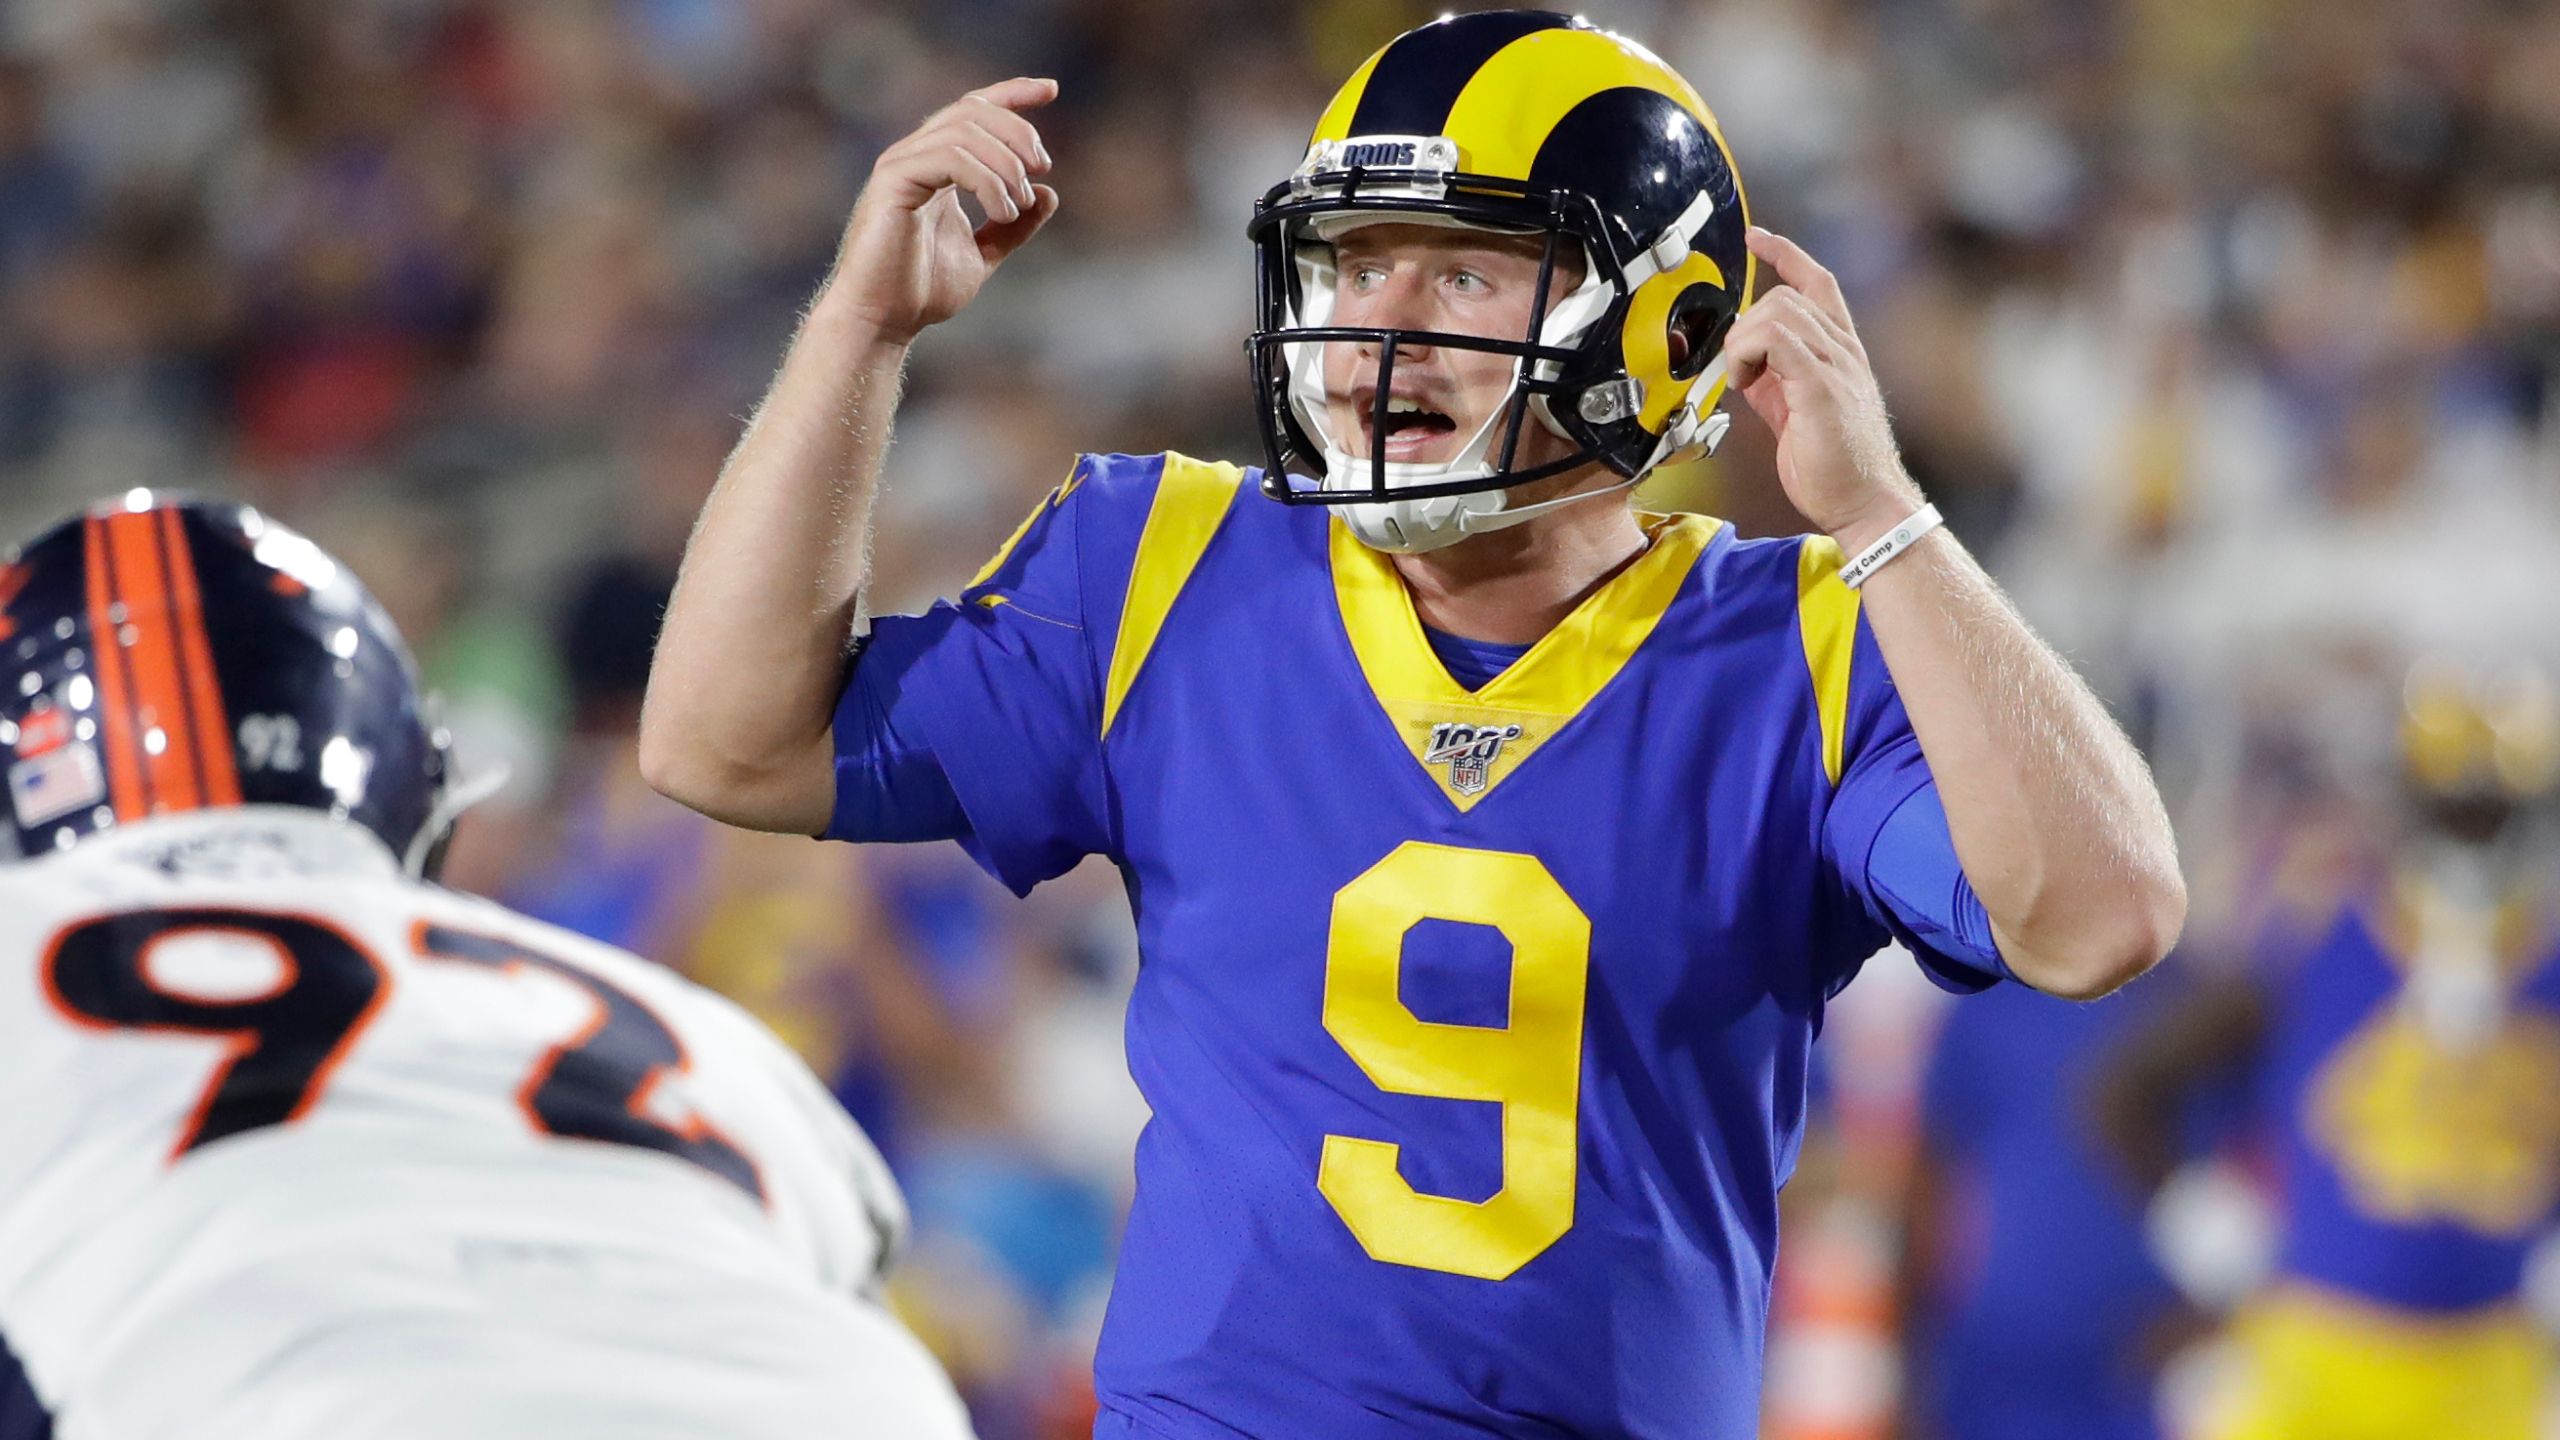 Cashing In: Rams QB Wolford To Make High Profile NFL Debut. KRQE News 13